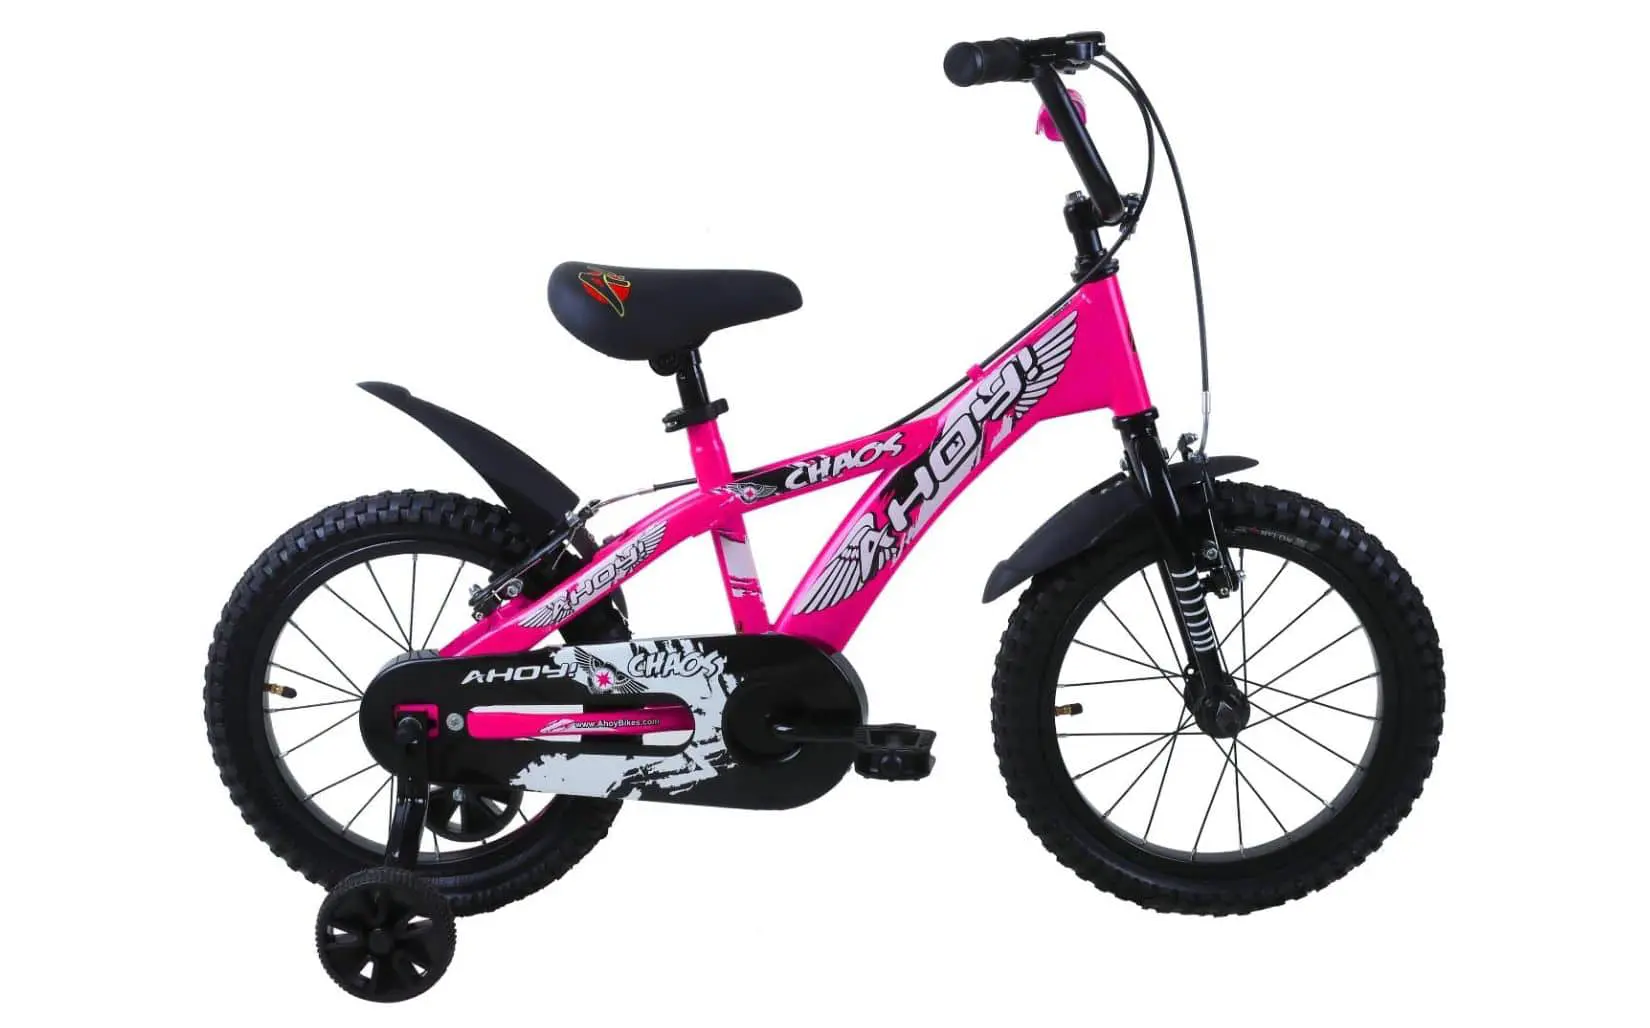 Chaos Girls Bike Single Speed 16T | Buy Pink Cycle Non Gear for Kids